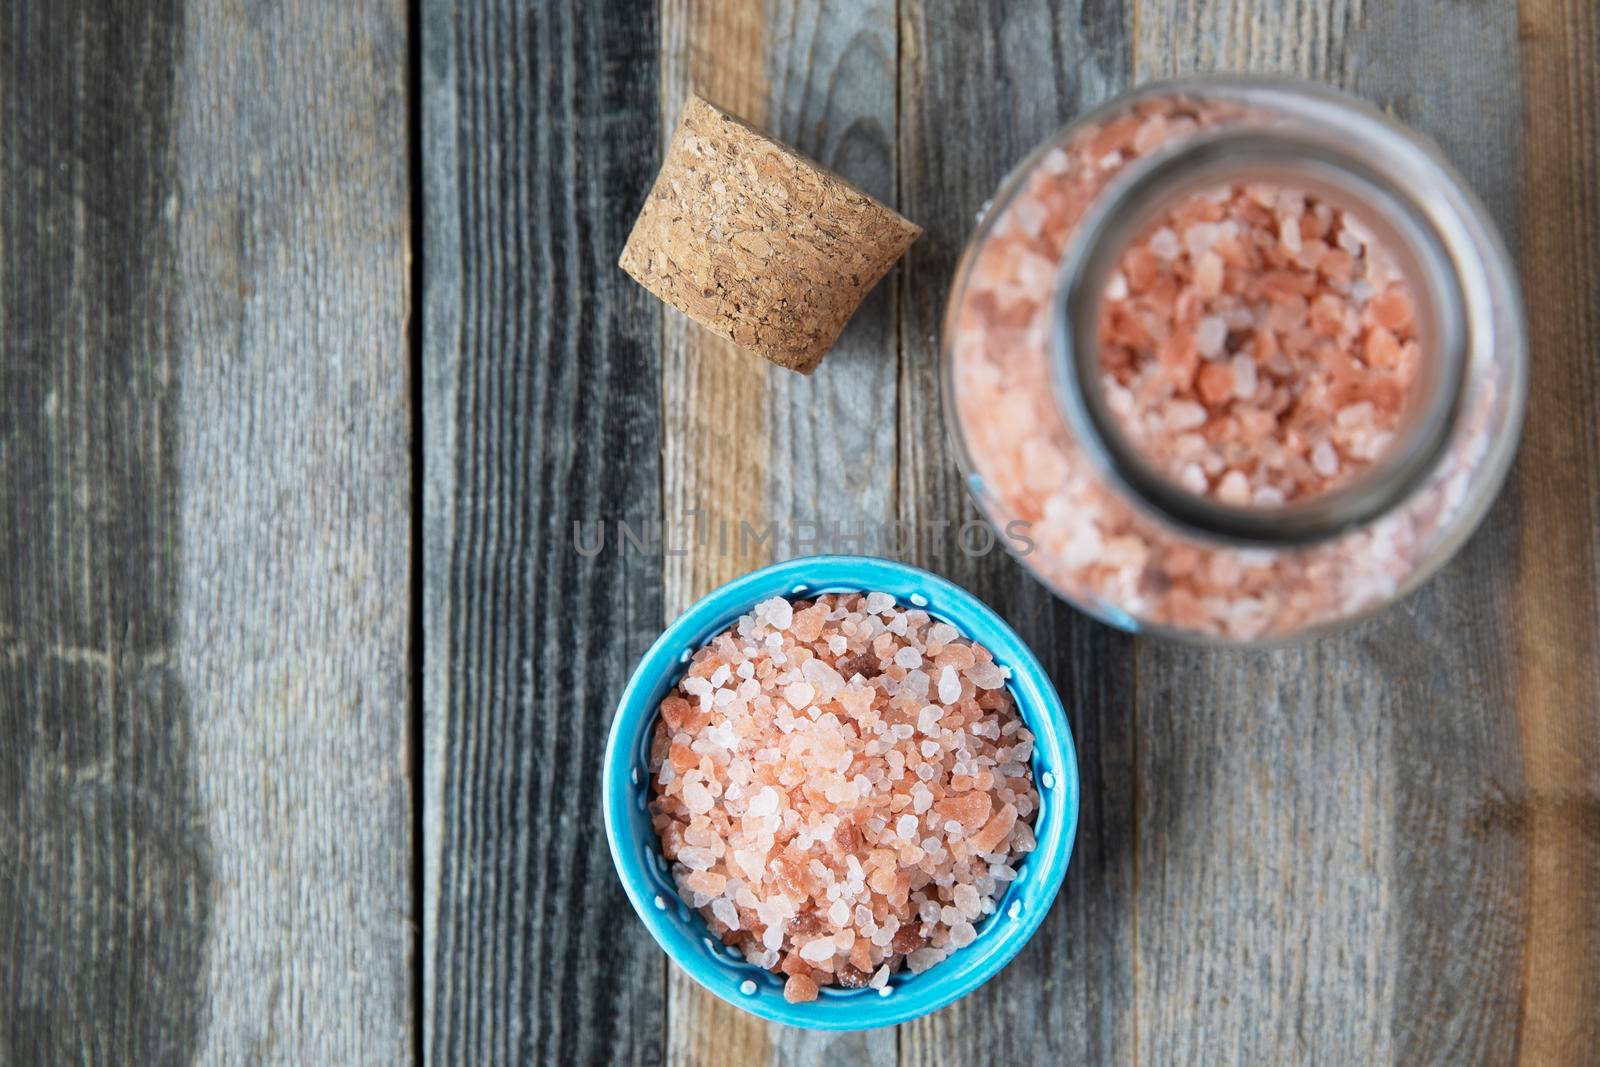 Pink Himalayan salt crystals in glass bottle and small bowl on wooden table flat lay.